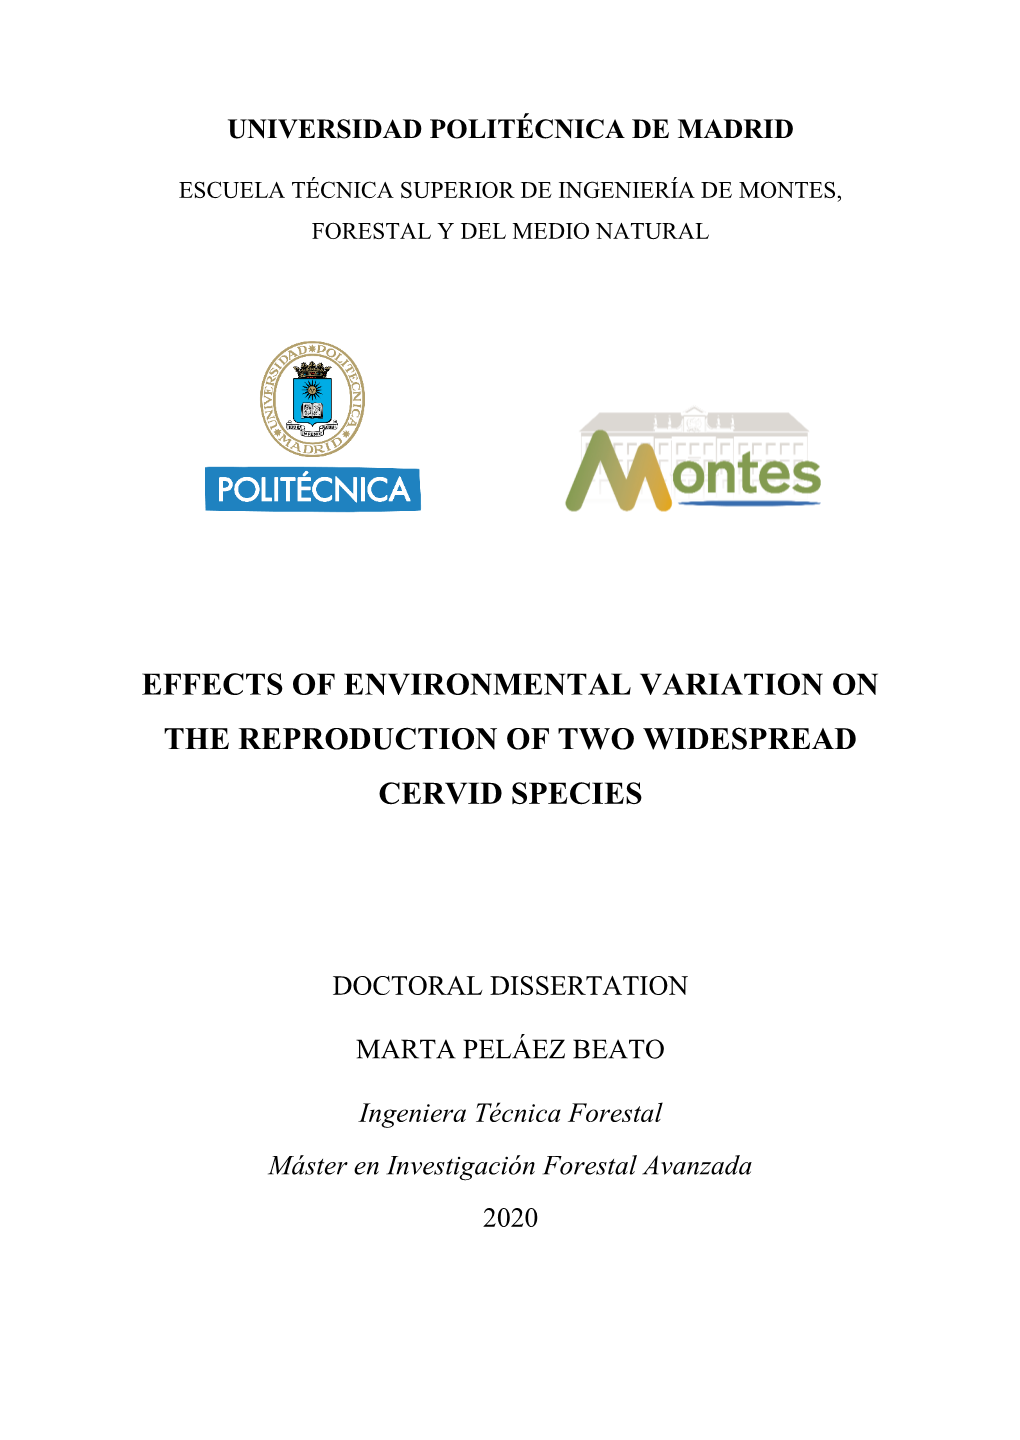 Effects of Environmental Variation on the Reproduction of Two Widespread Cervid Species